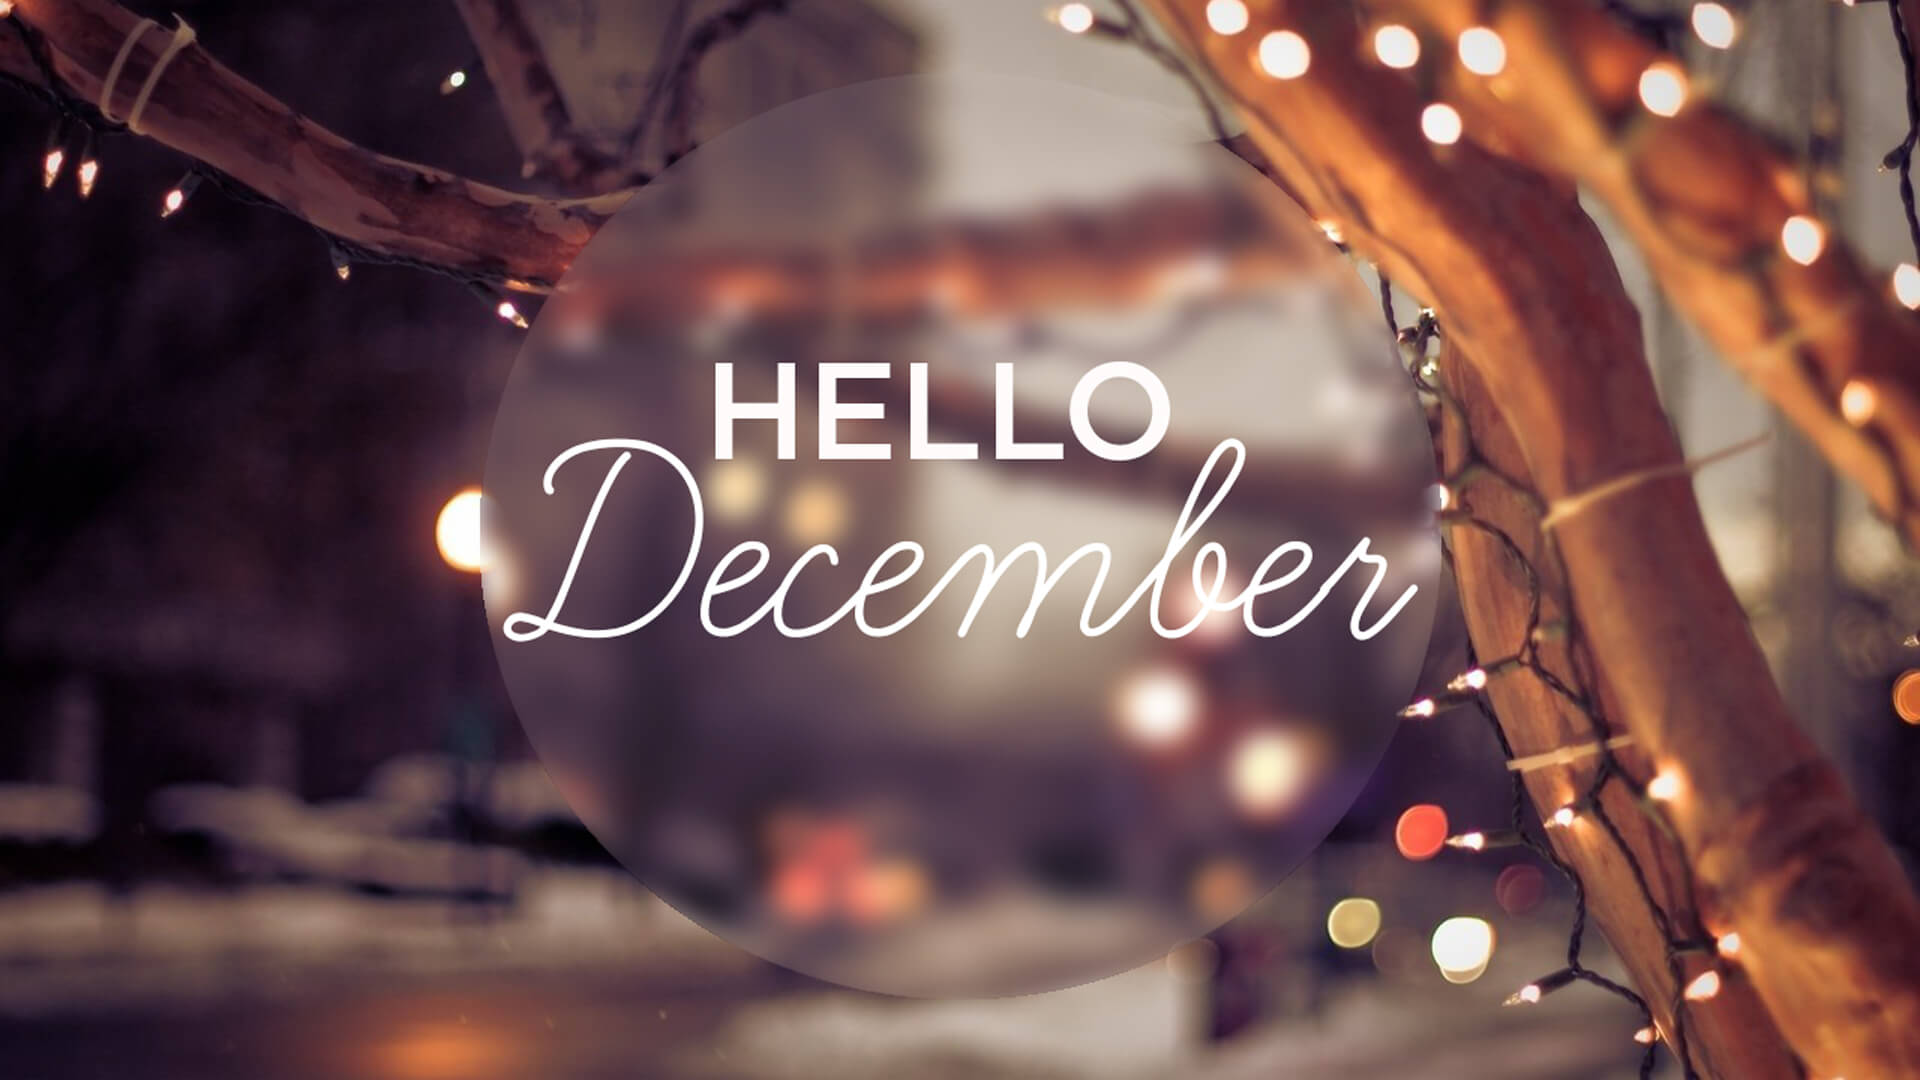 Welcome December Quotes and Sayings 2022